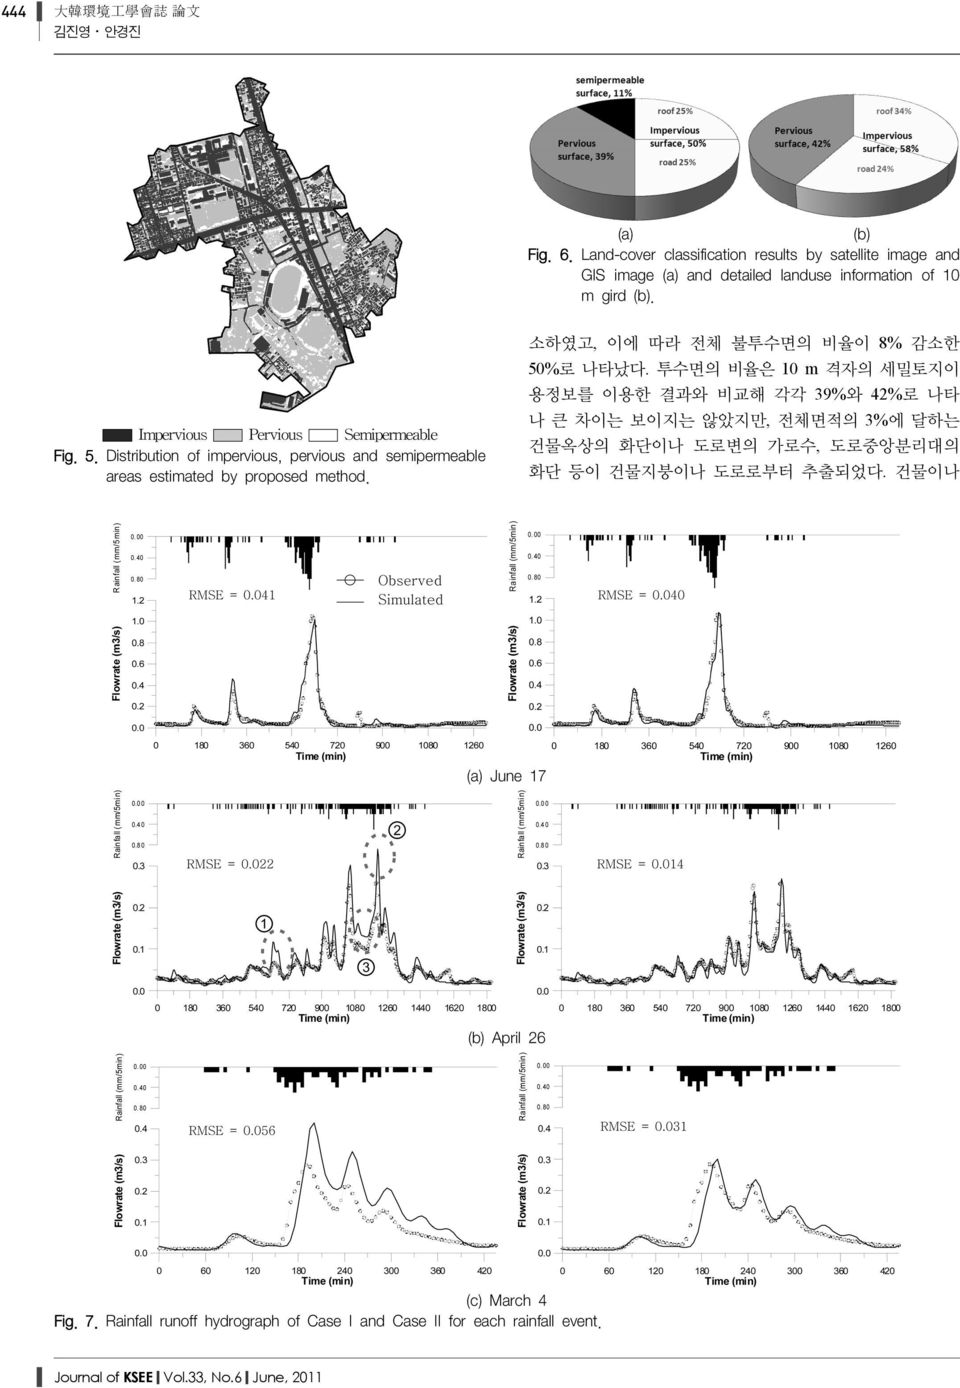 Distribution of impervious, pervious and semipermeable areas estimated by proposed method. 소하였고, 이에 따라 전체 불투수면의 비율이 8% 감소한 50%로 나타났다.